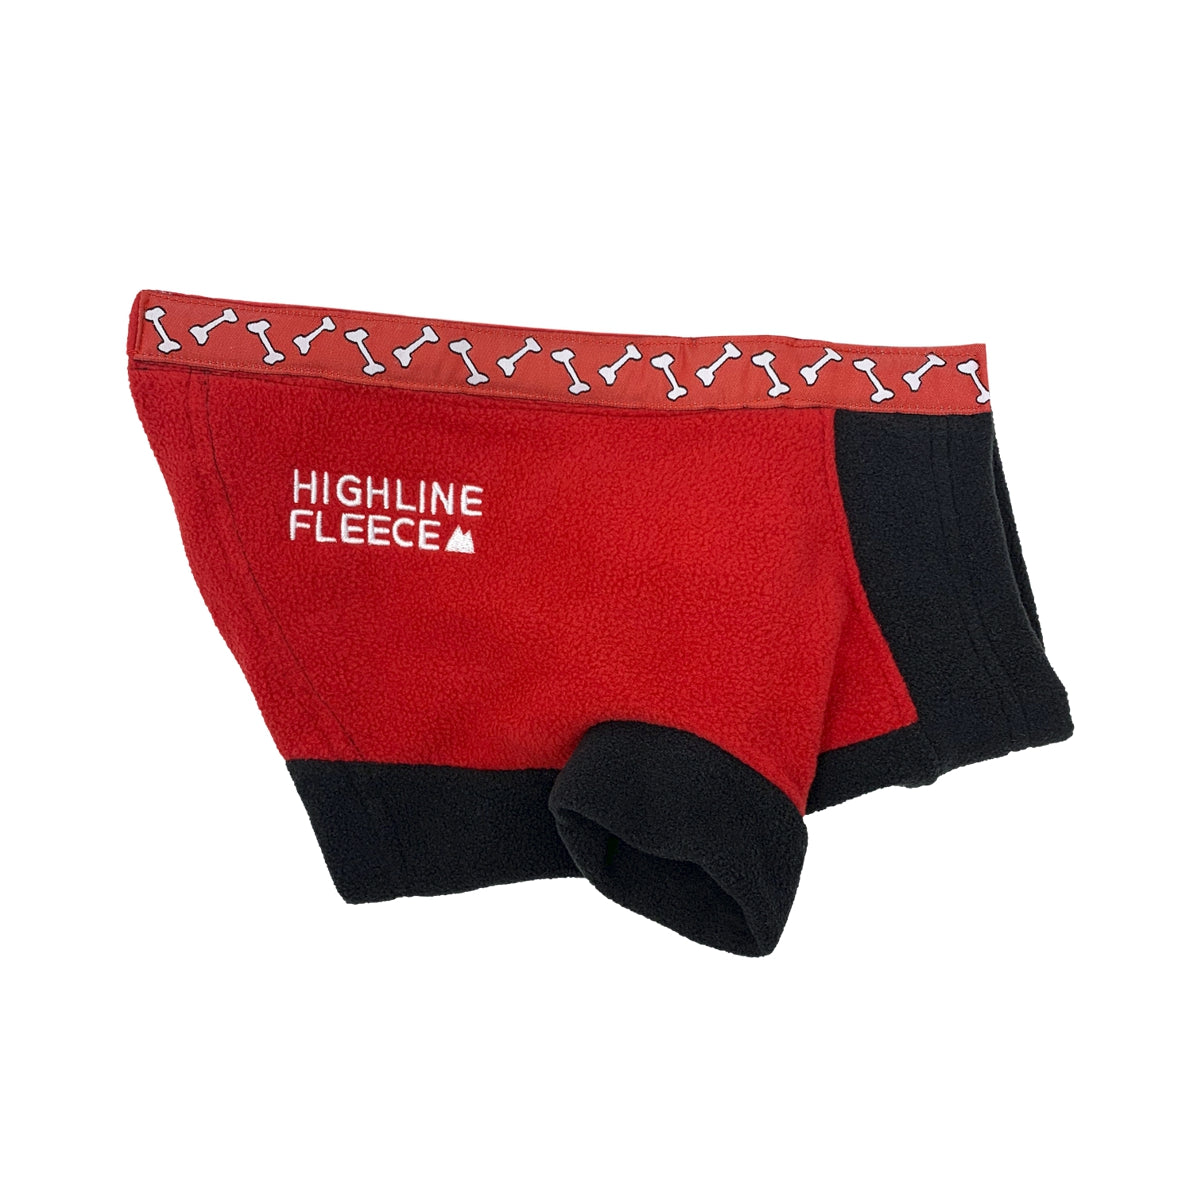 Highline Fleece Dog Coat - Red and Black with Rolling Bones | Pawlicious & Company